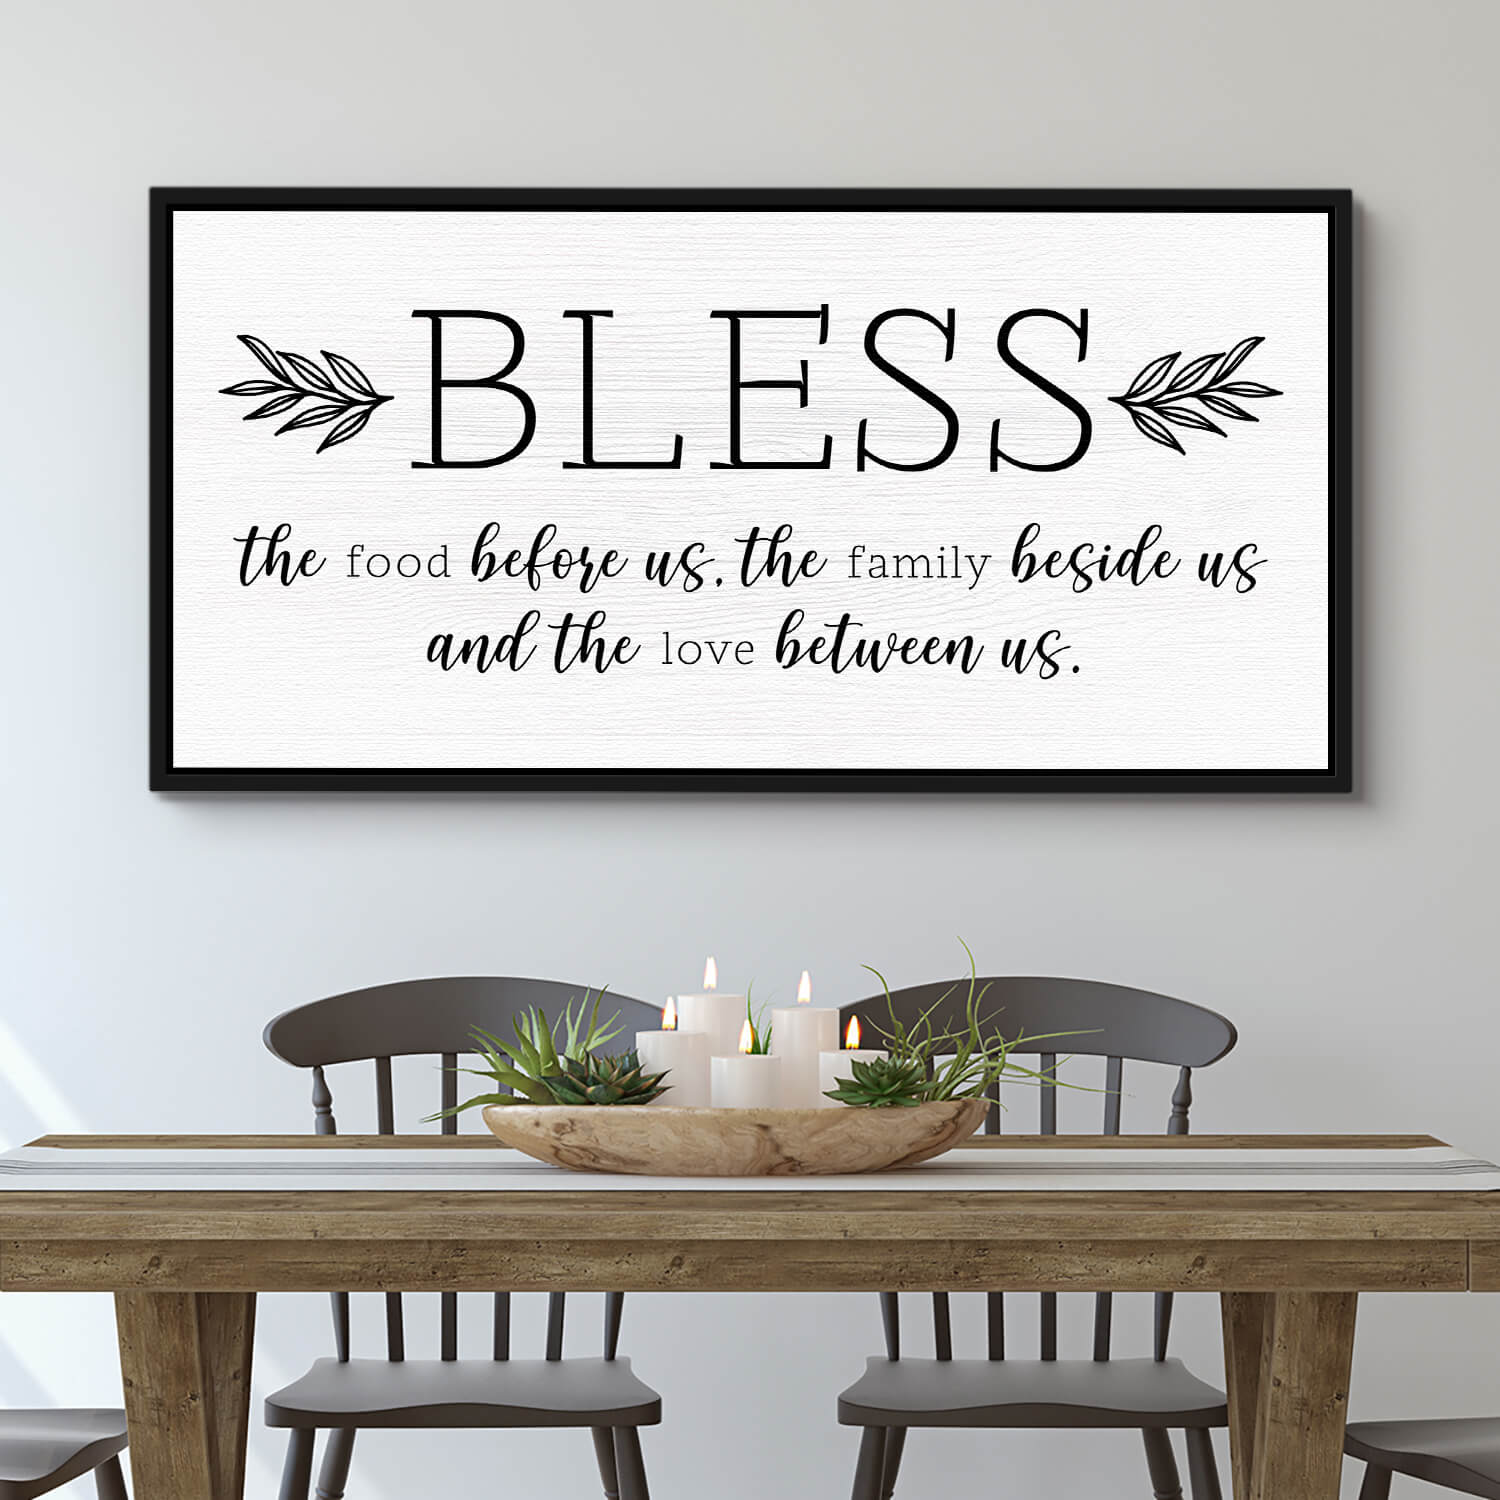 Bless international Bass Fishing On Canvas by Ephrazy Graphics